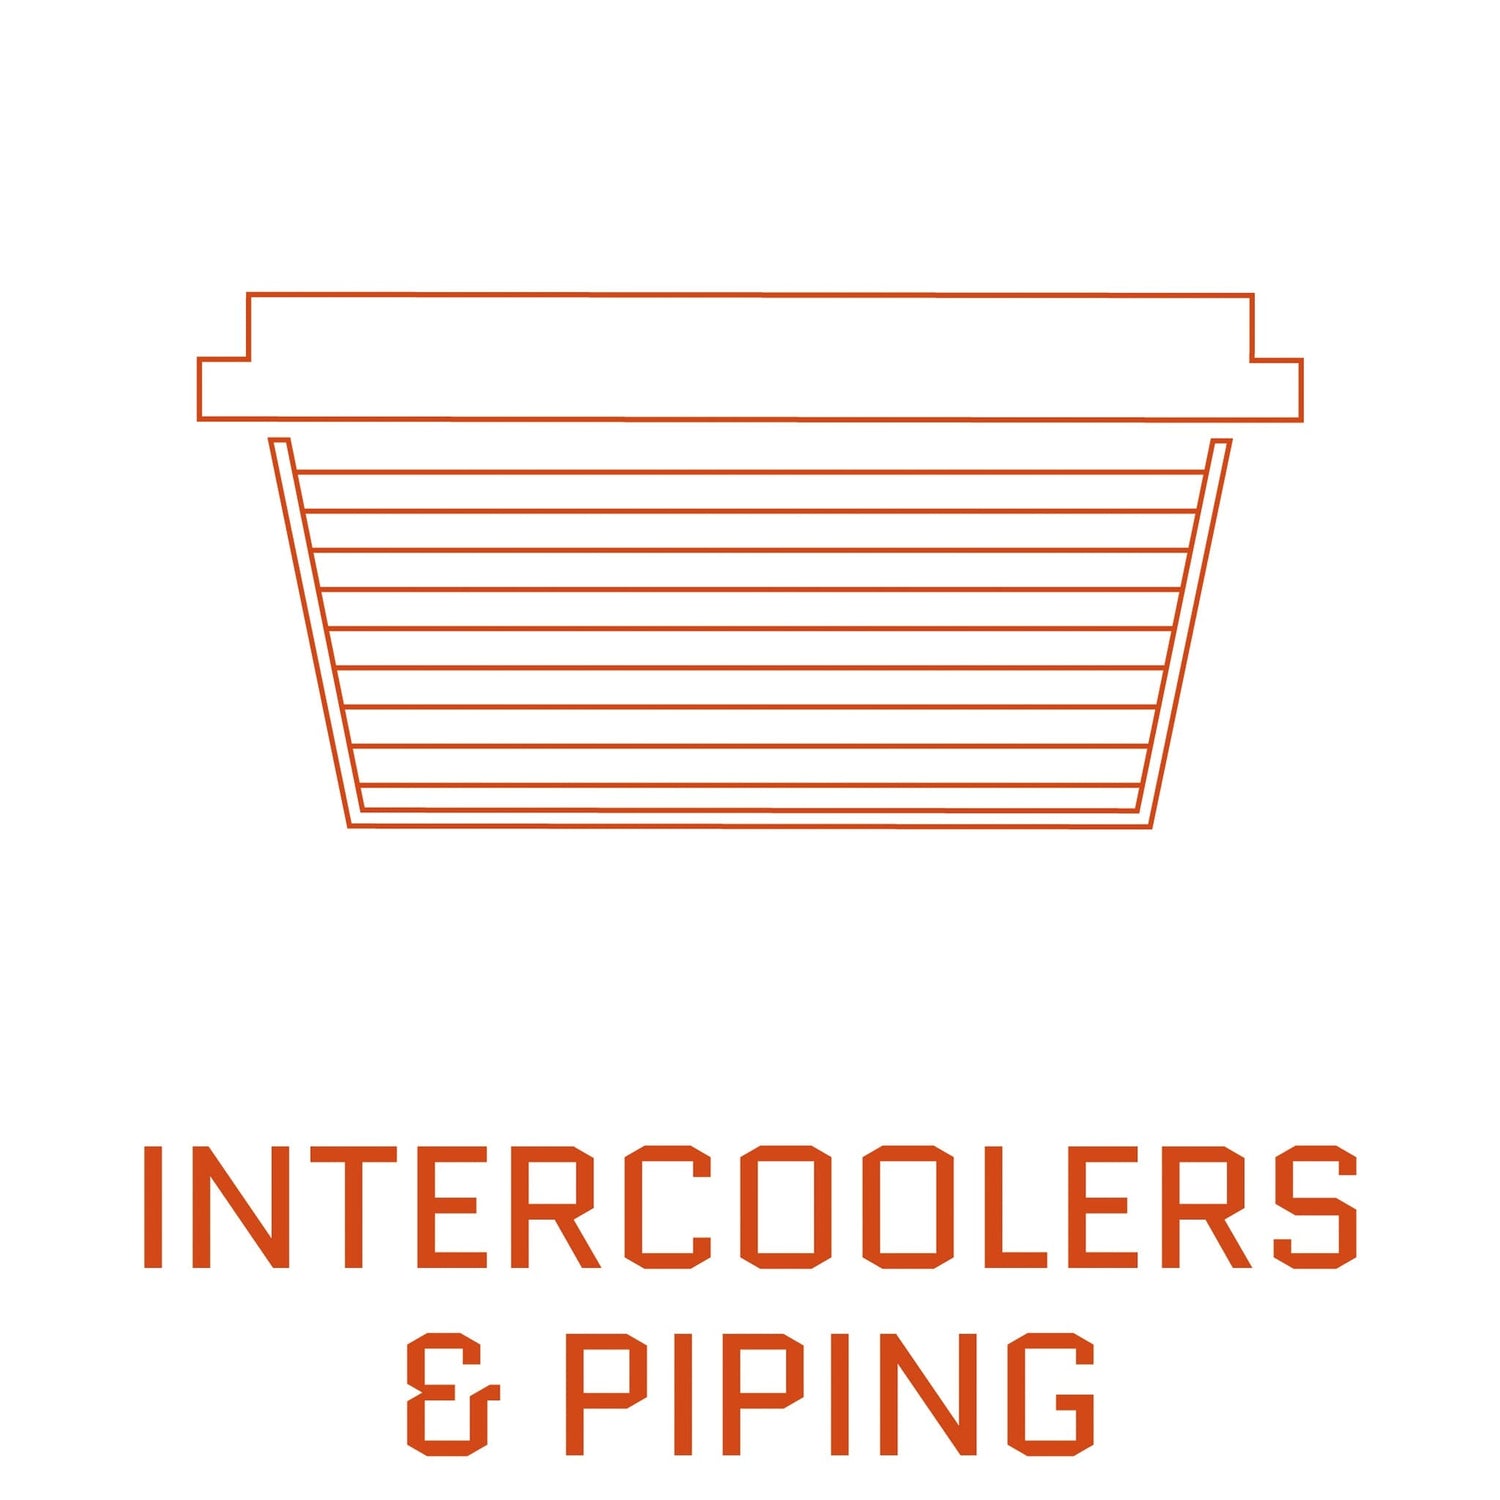 13-19 Explorer: Intercoolers and Piping